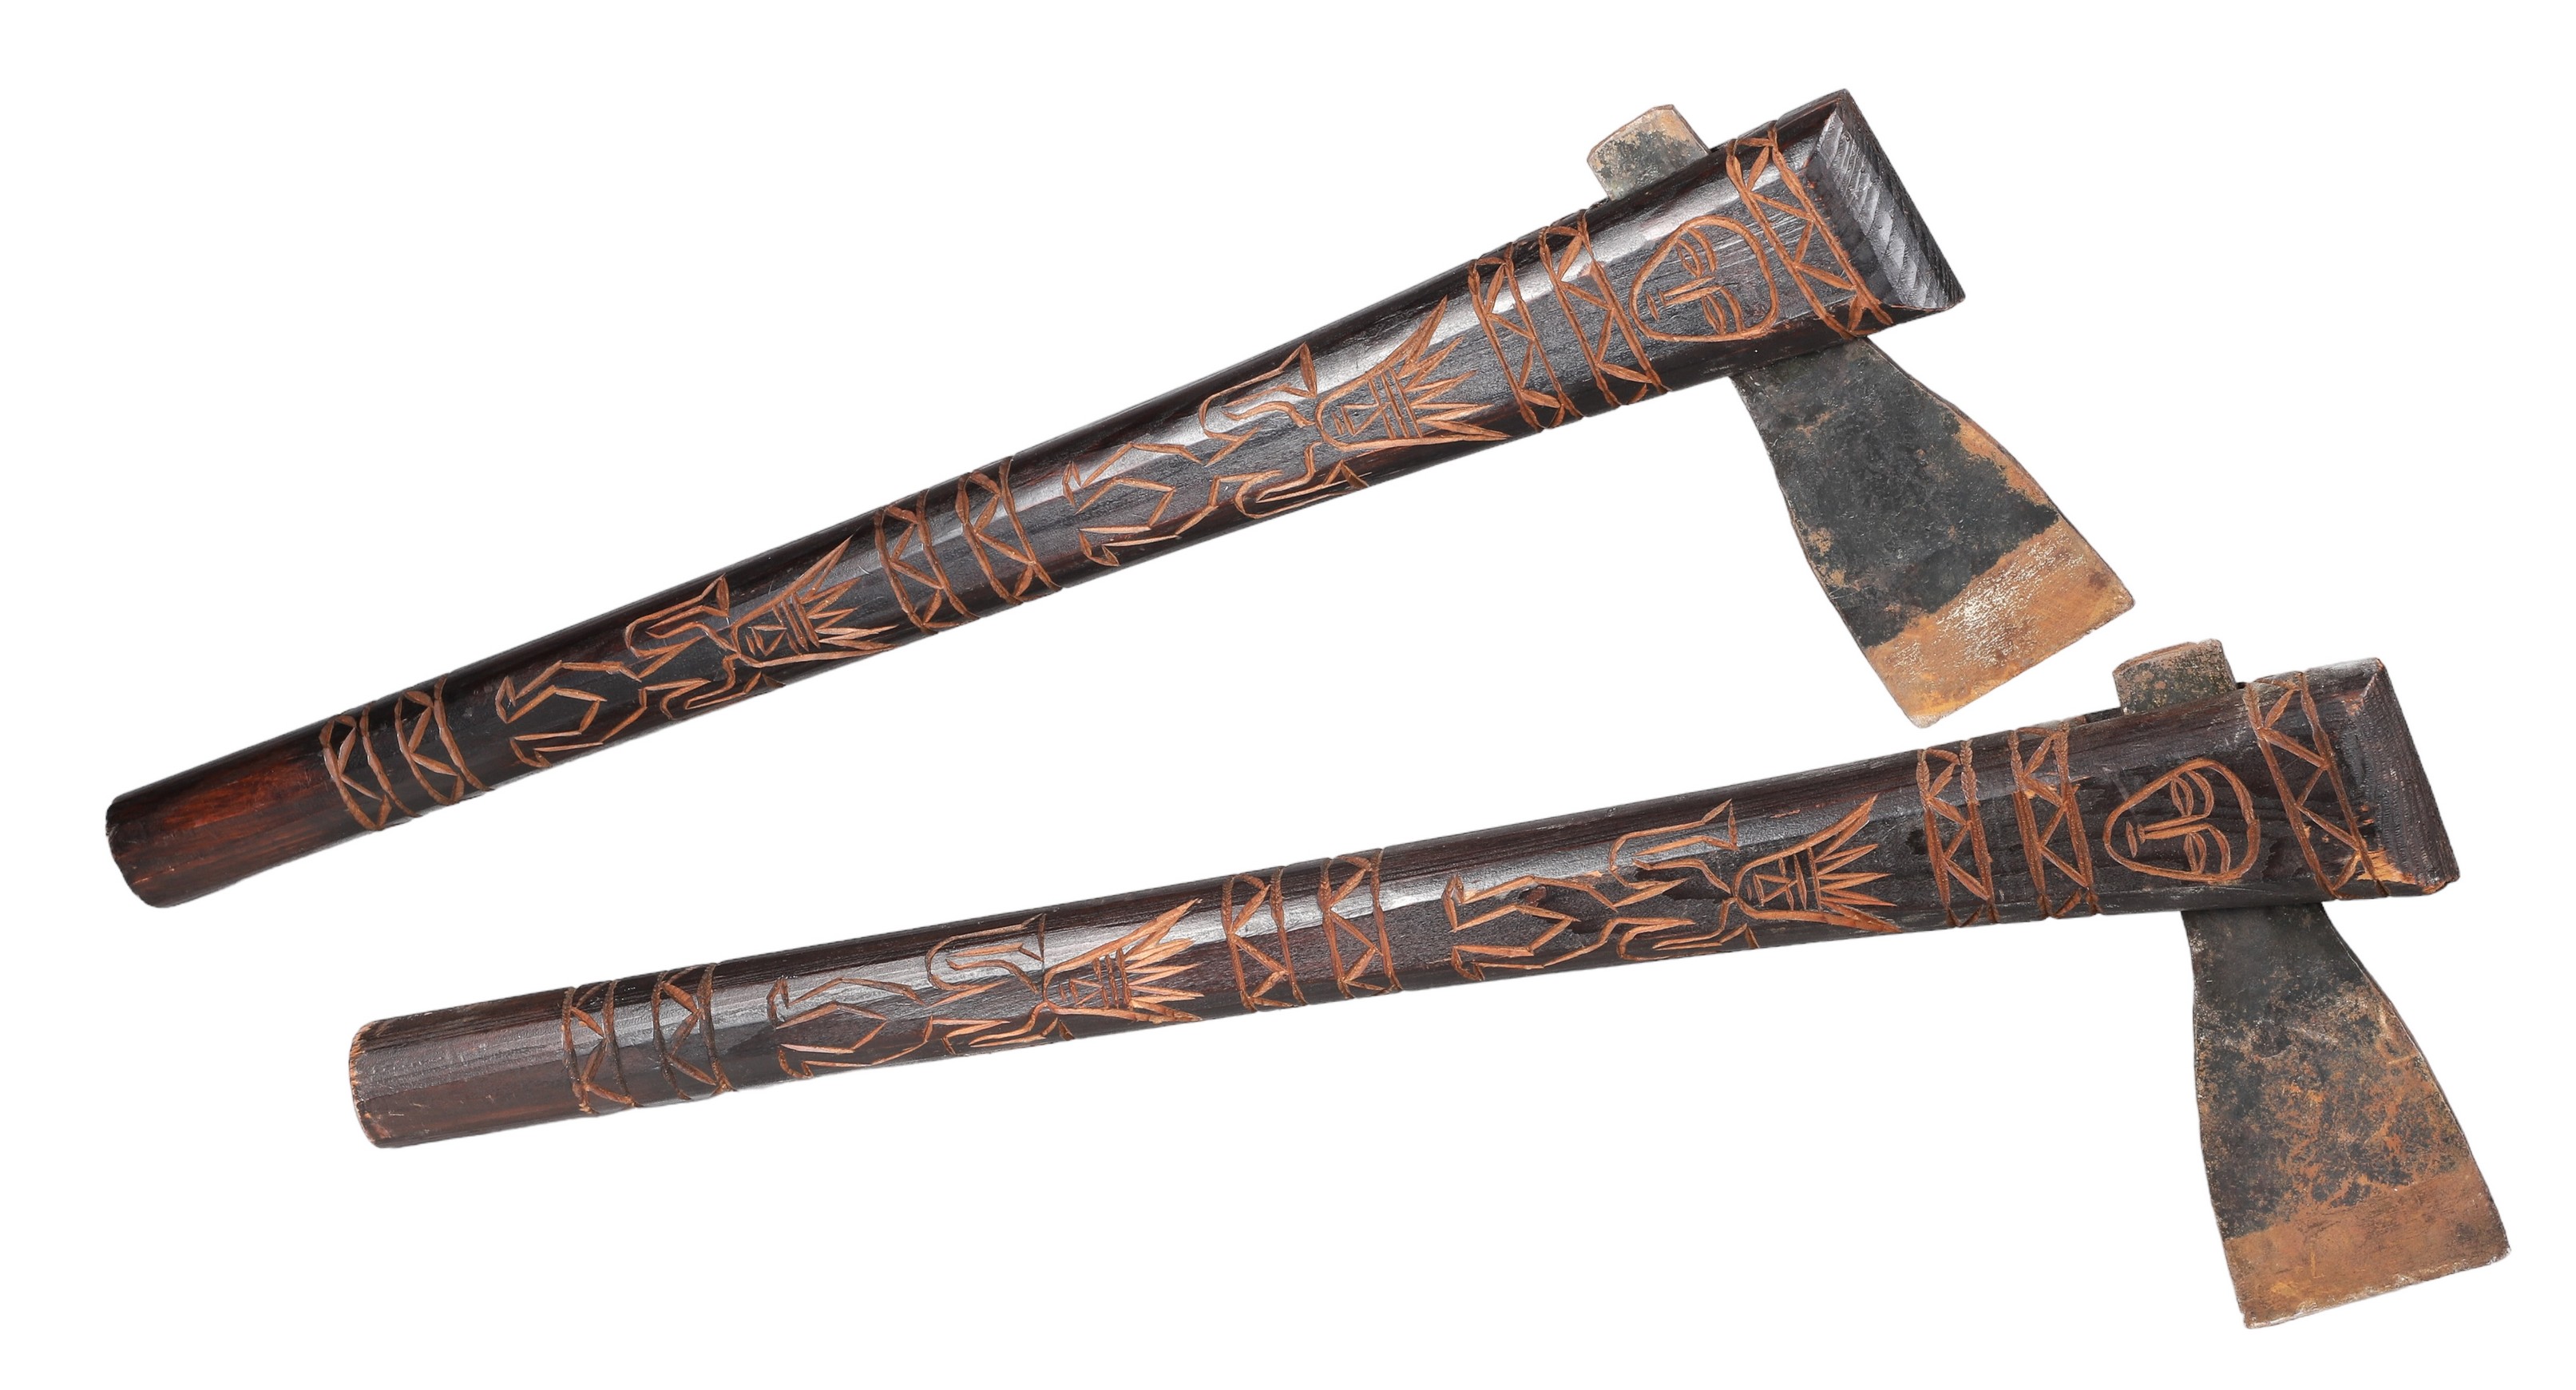 African carved wood axe pair, 21-1/2"L